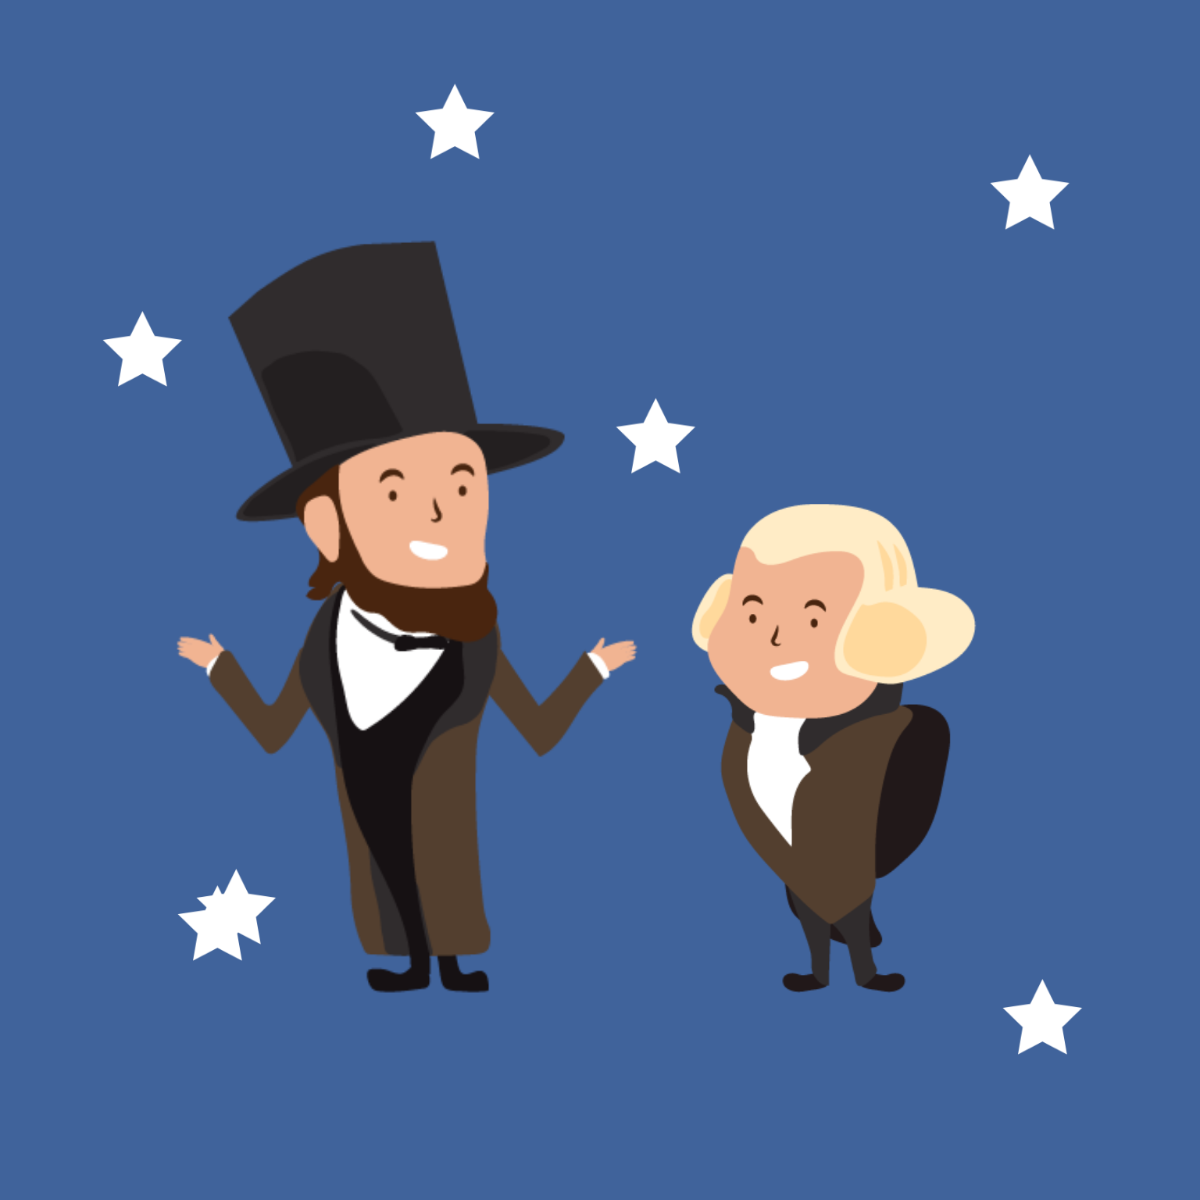 Happy Presidents' Day Illustration Template